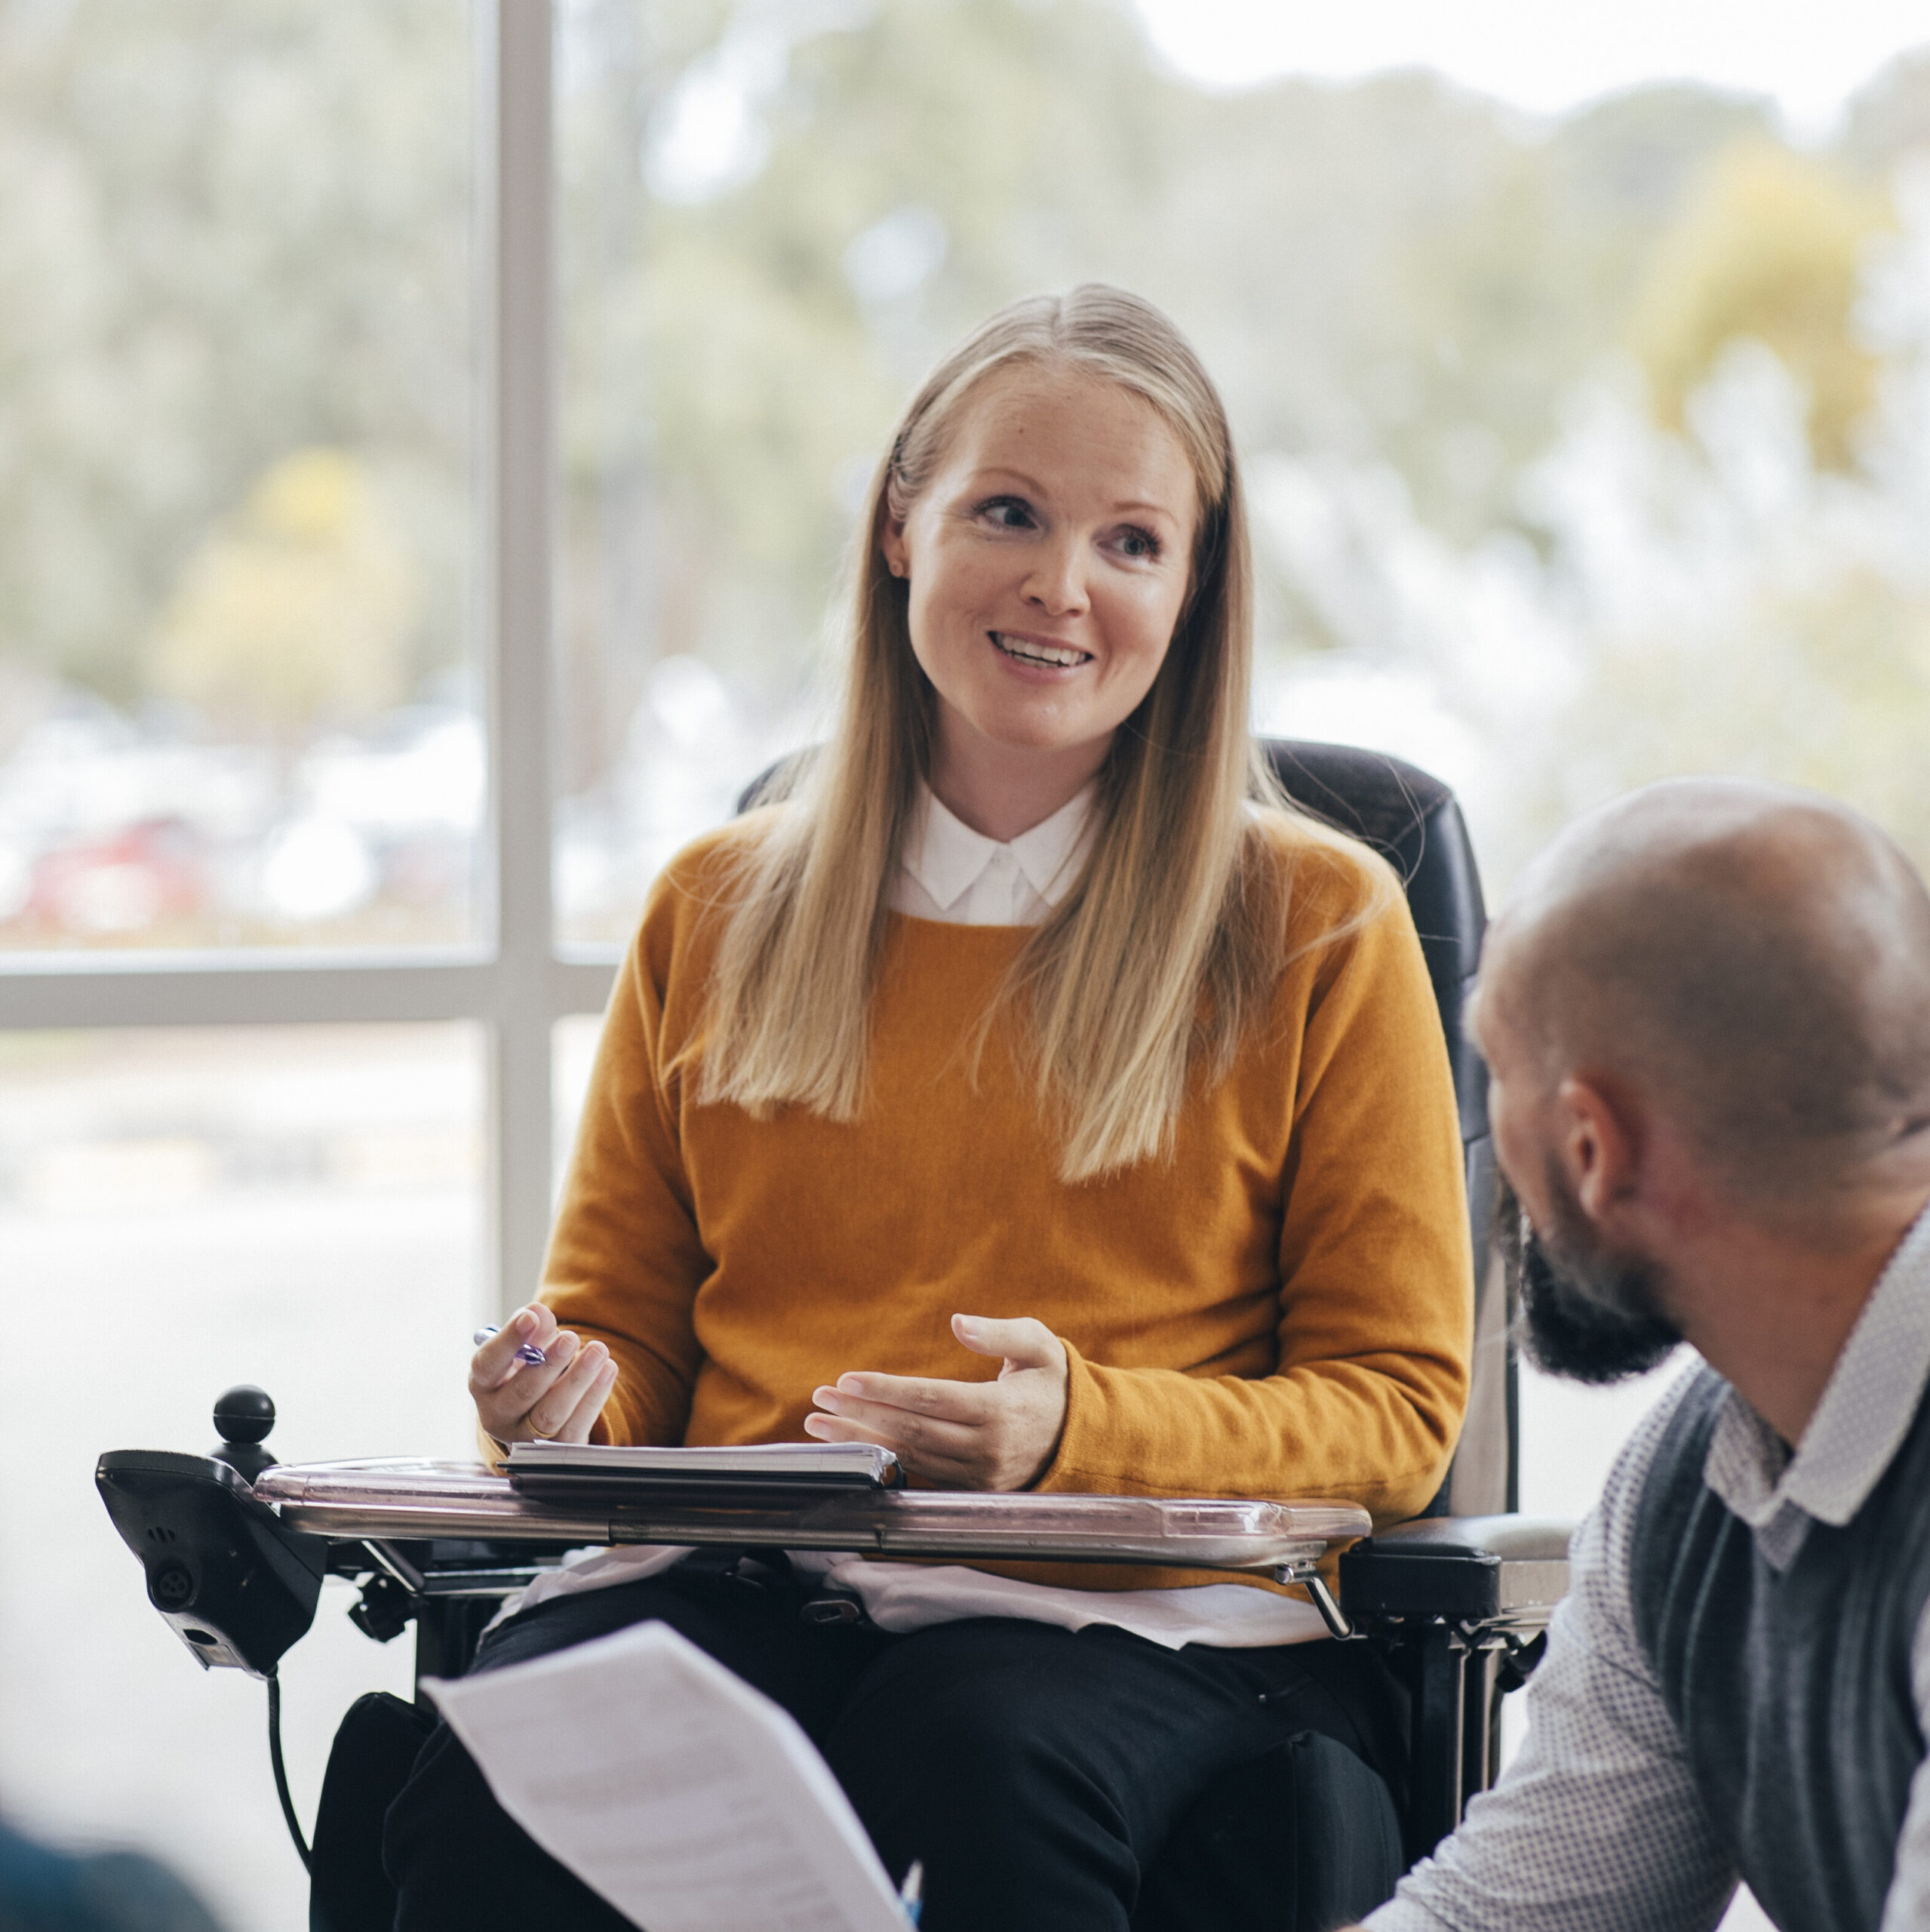 A woman looks happy and confident as she leads a group discussion at her place of work. She is a wheelchair user and has Muscular Dystrophy.